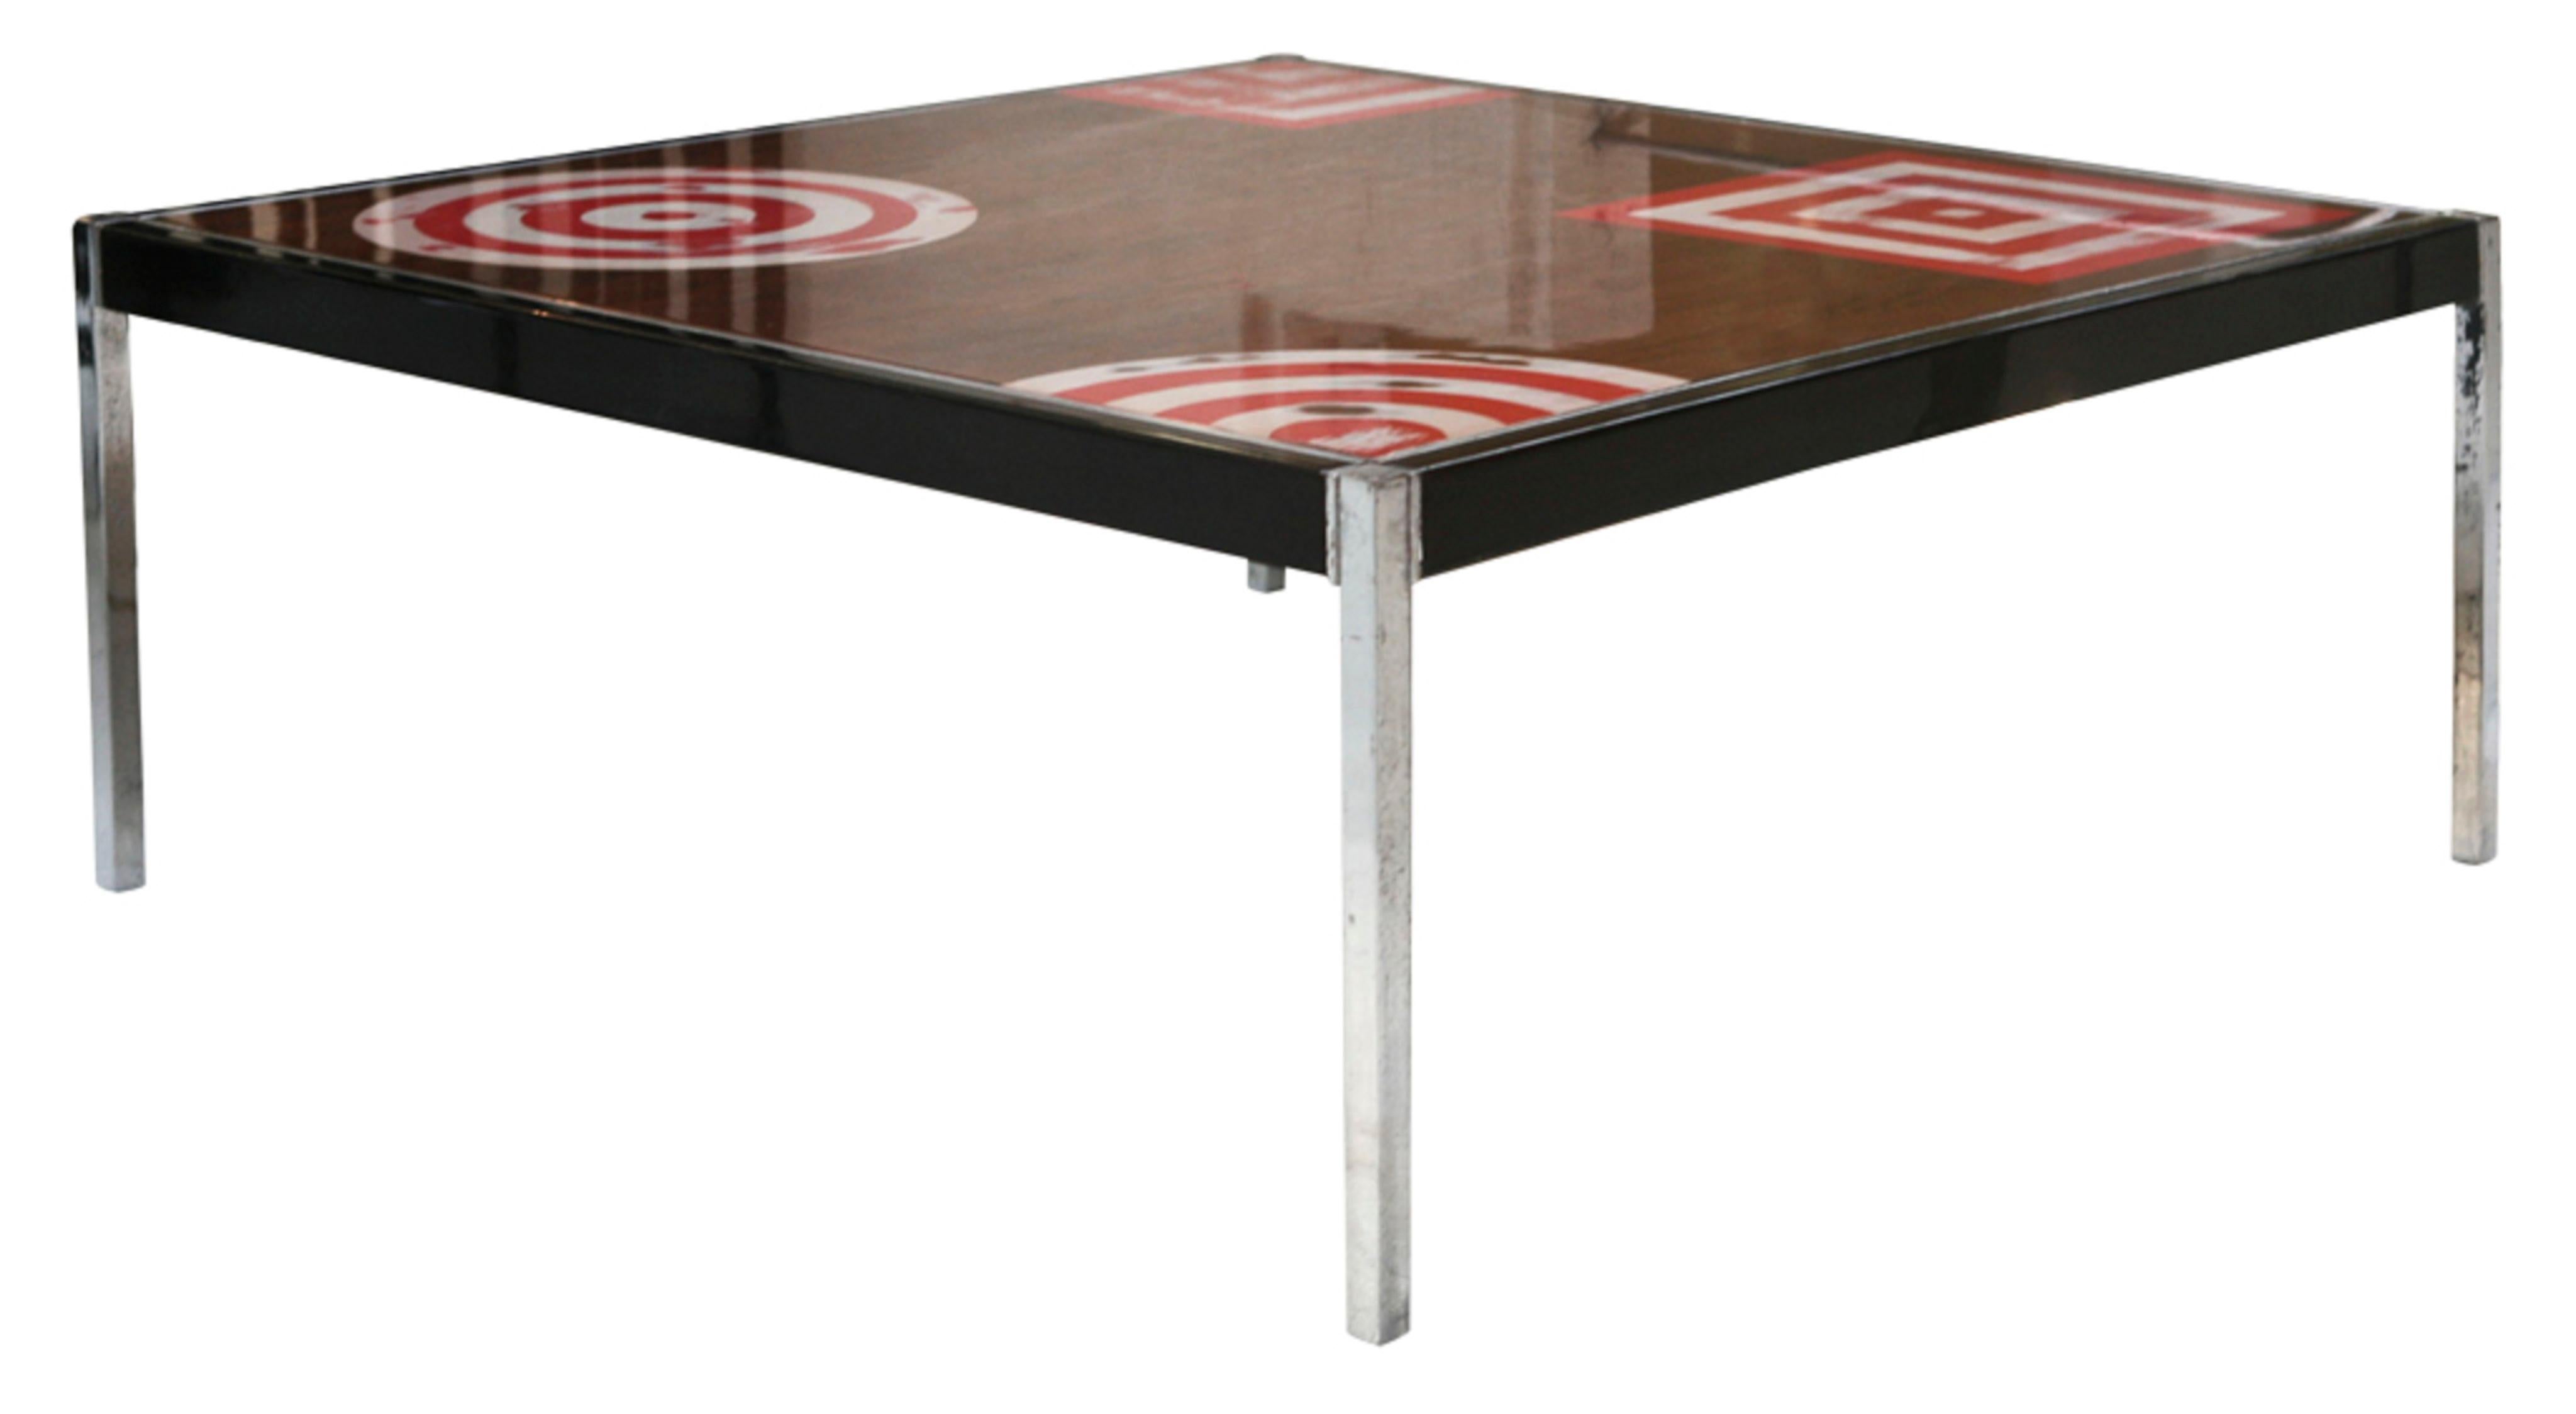 Coffe table in wood and chromed bronze.

Year: 1960
Country: France
It is an elegant and sophisticated coffe table.
You want to live in the golden years, this is the dining table that your project needs.
We have specialized in the sale of Art Deco